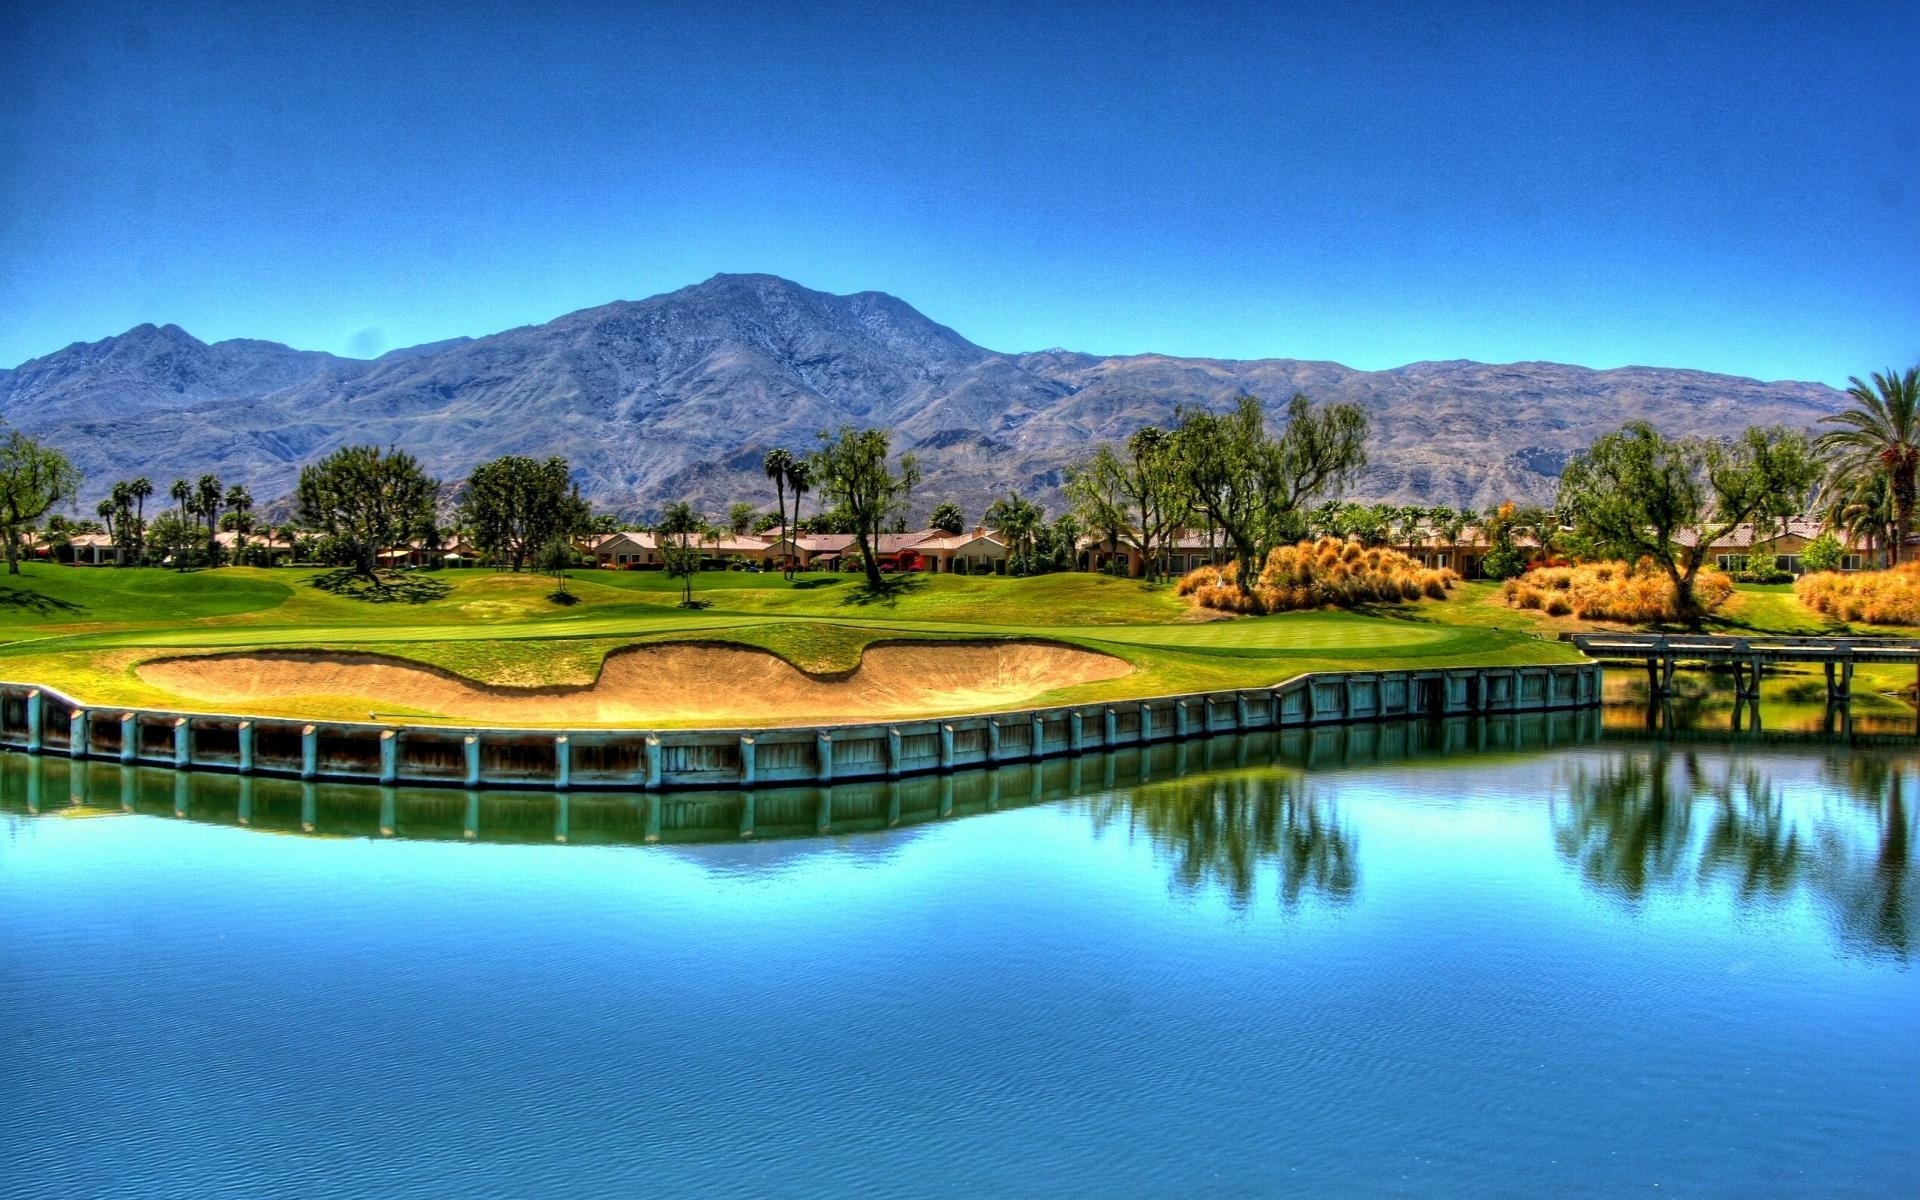 10 Most Popular Hd Golf Course Wallpaper FULL HD 1920×1080 For PC Background